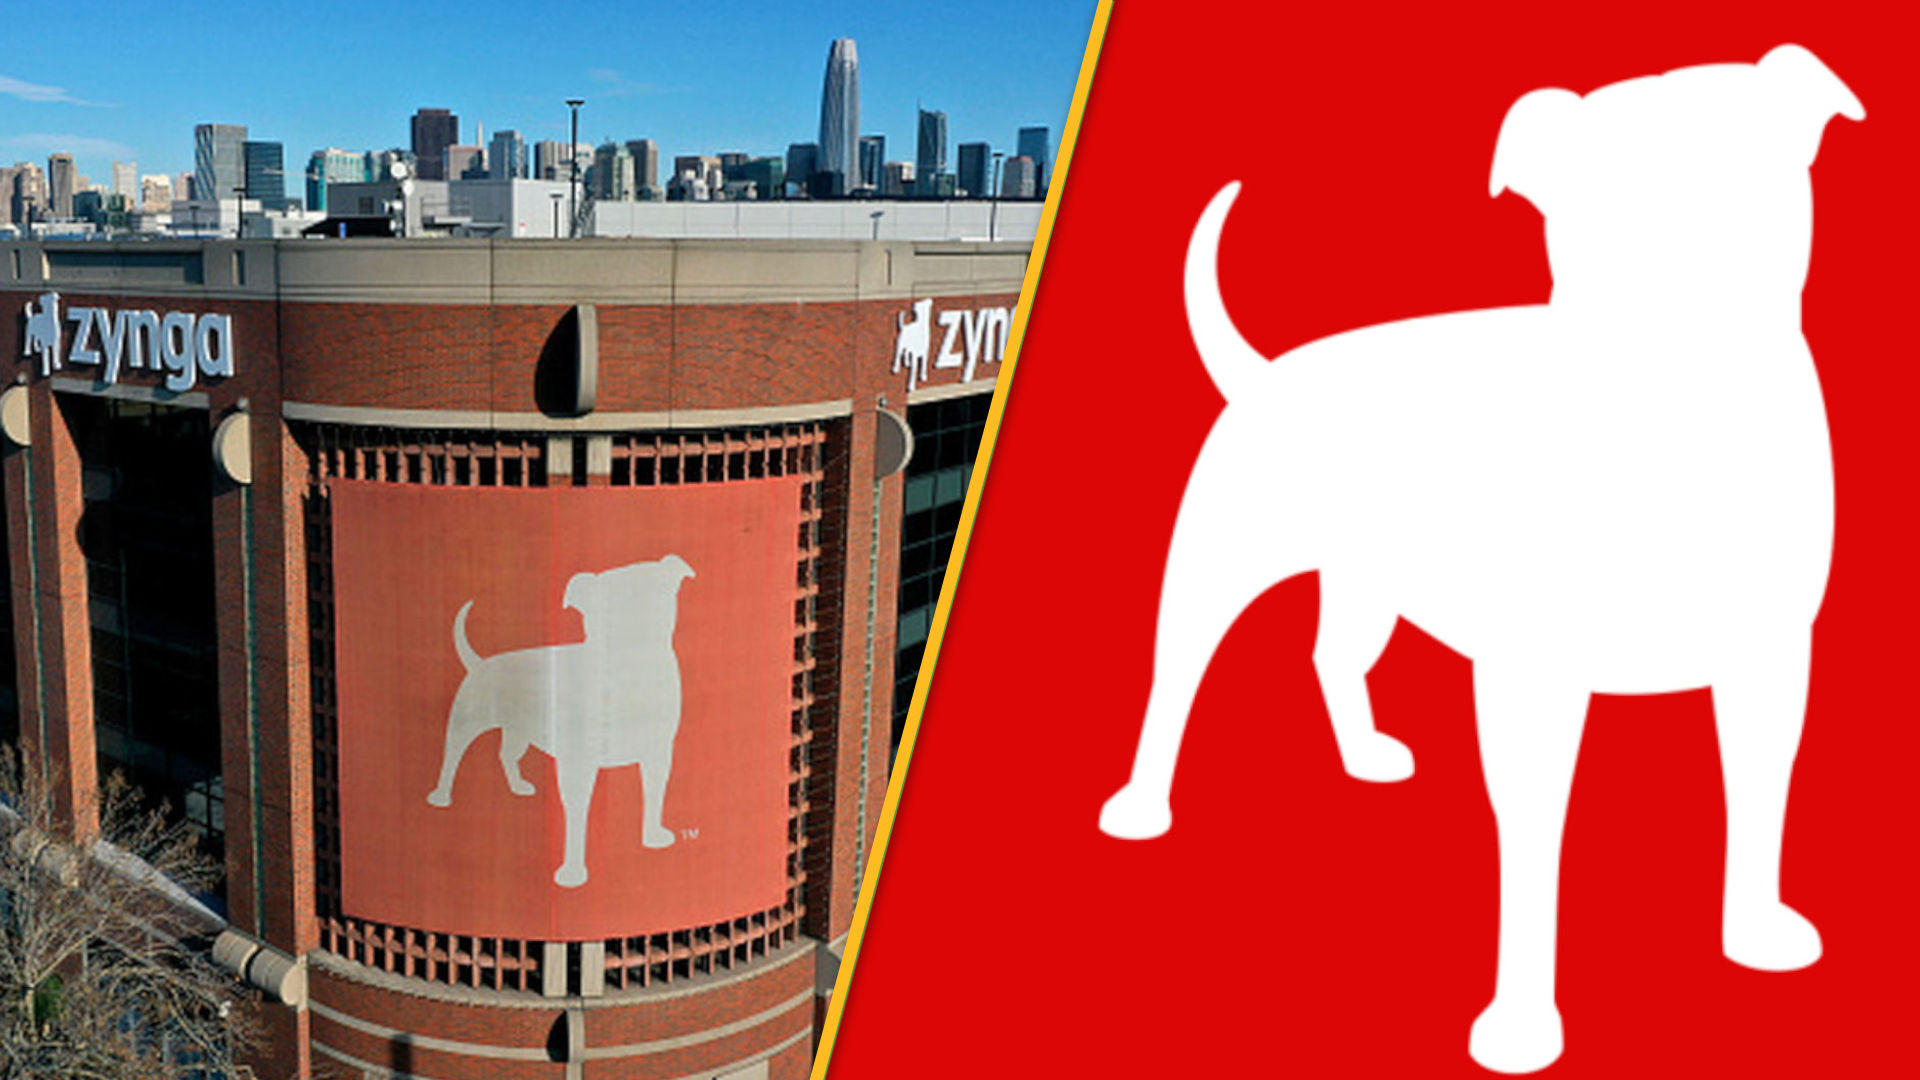 Zynga revenue is up ahead of the Take-Two acquisition